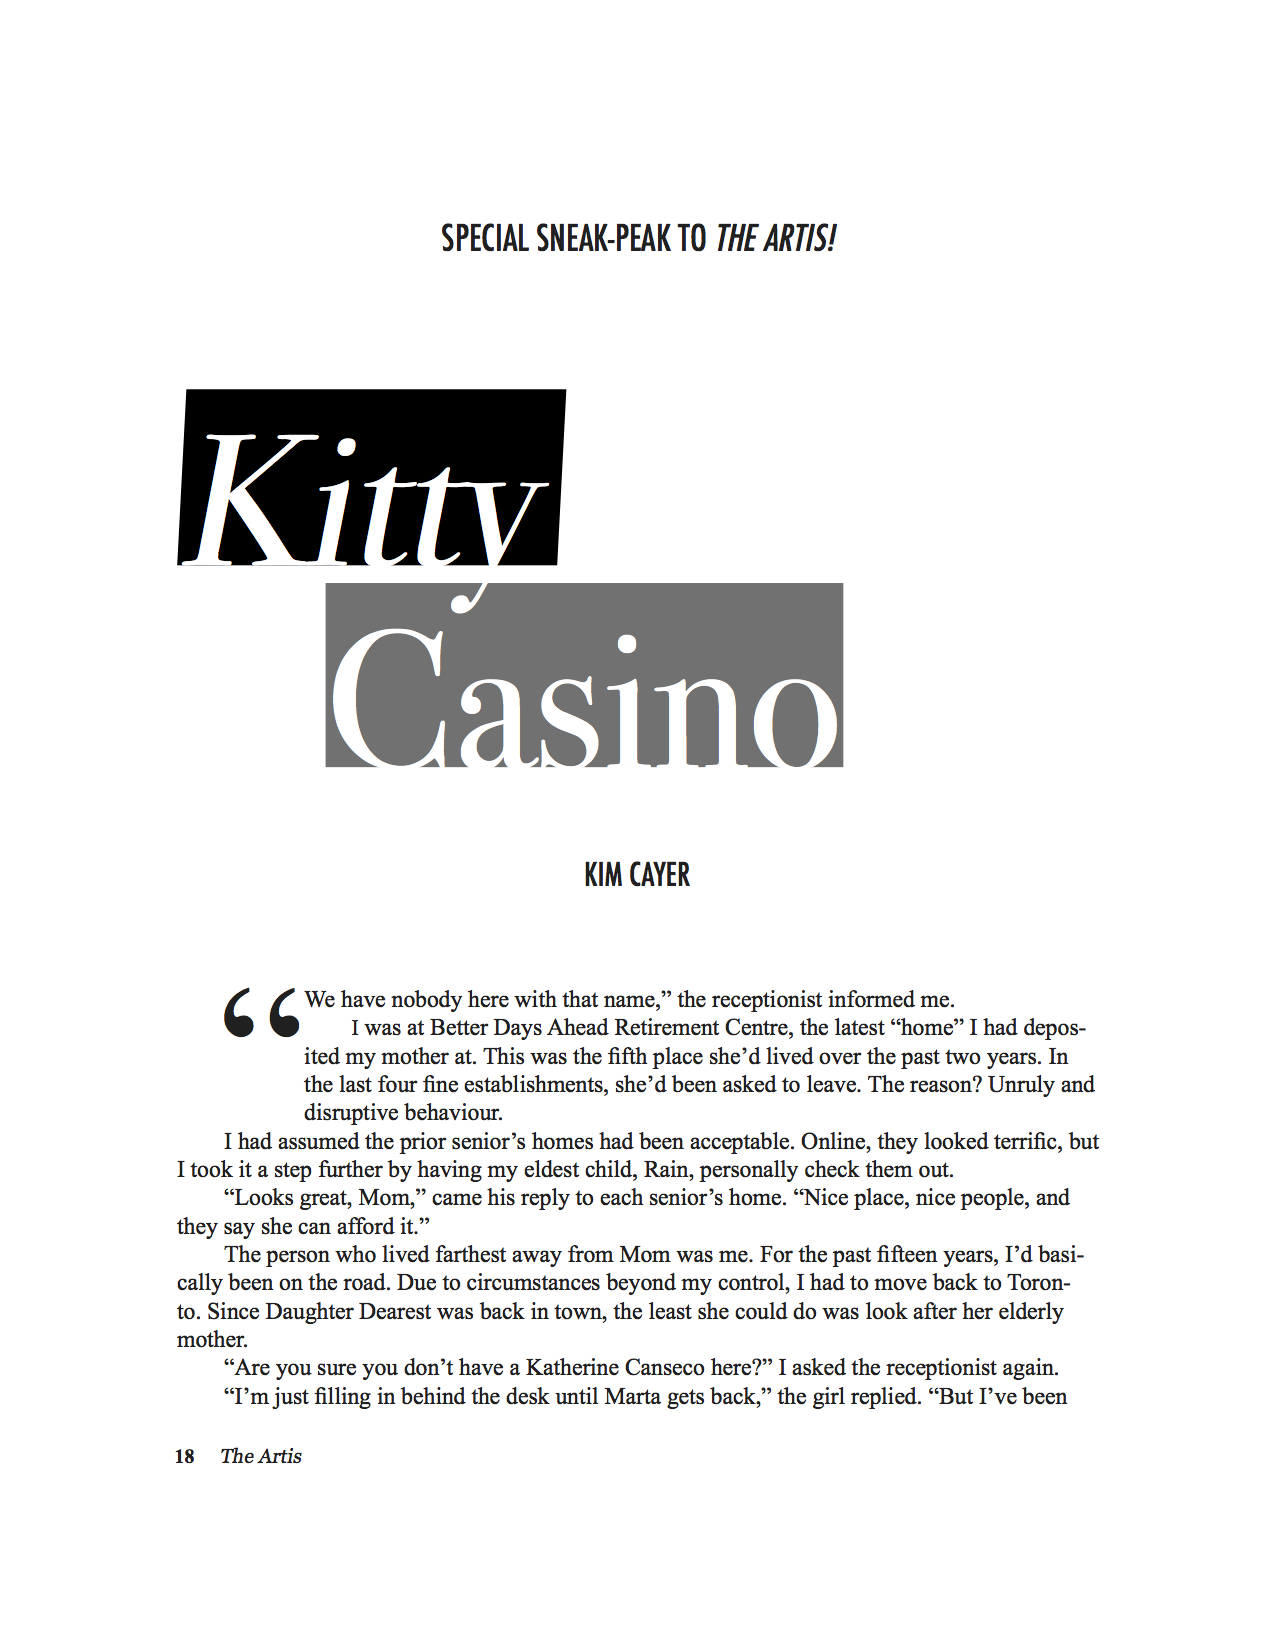 Artis 2 Kitty Casino 3 pages.jpg